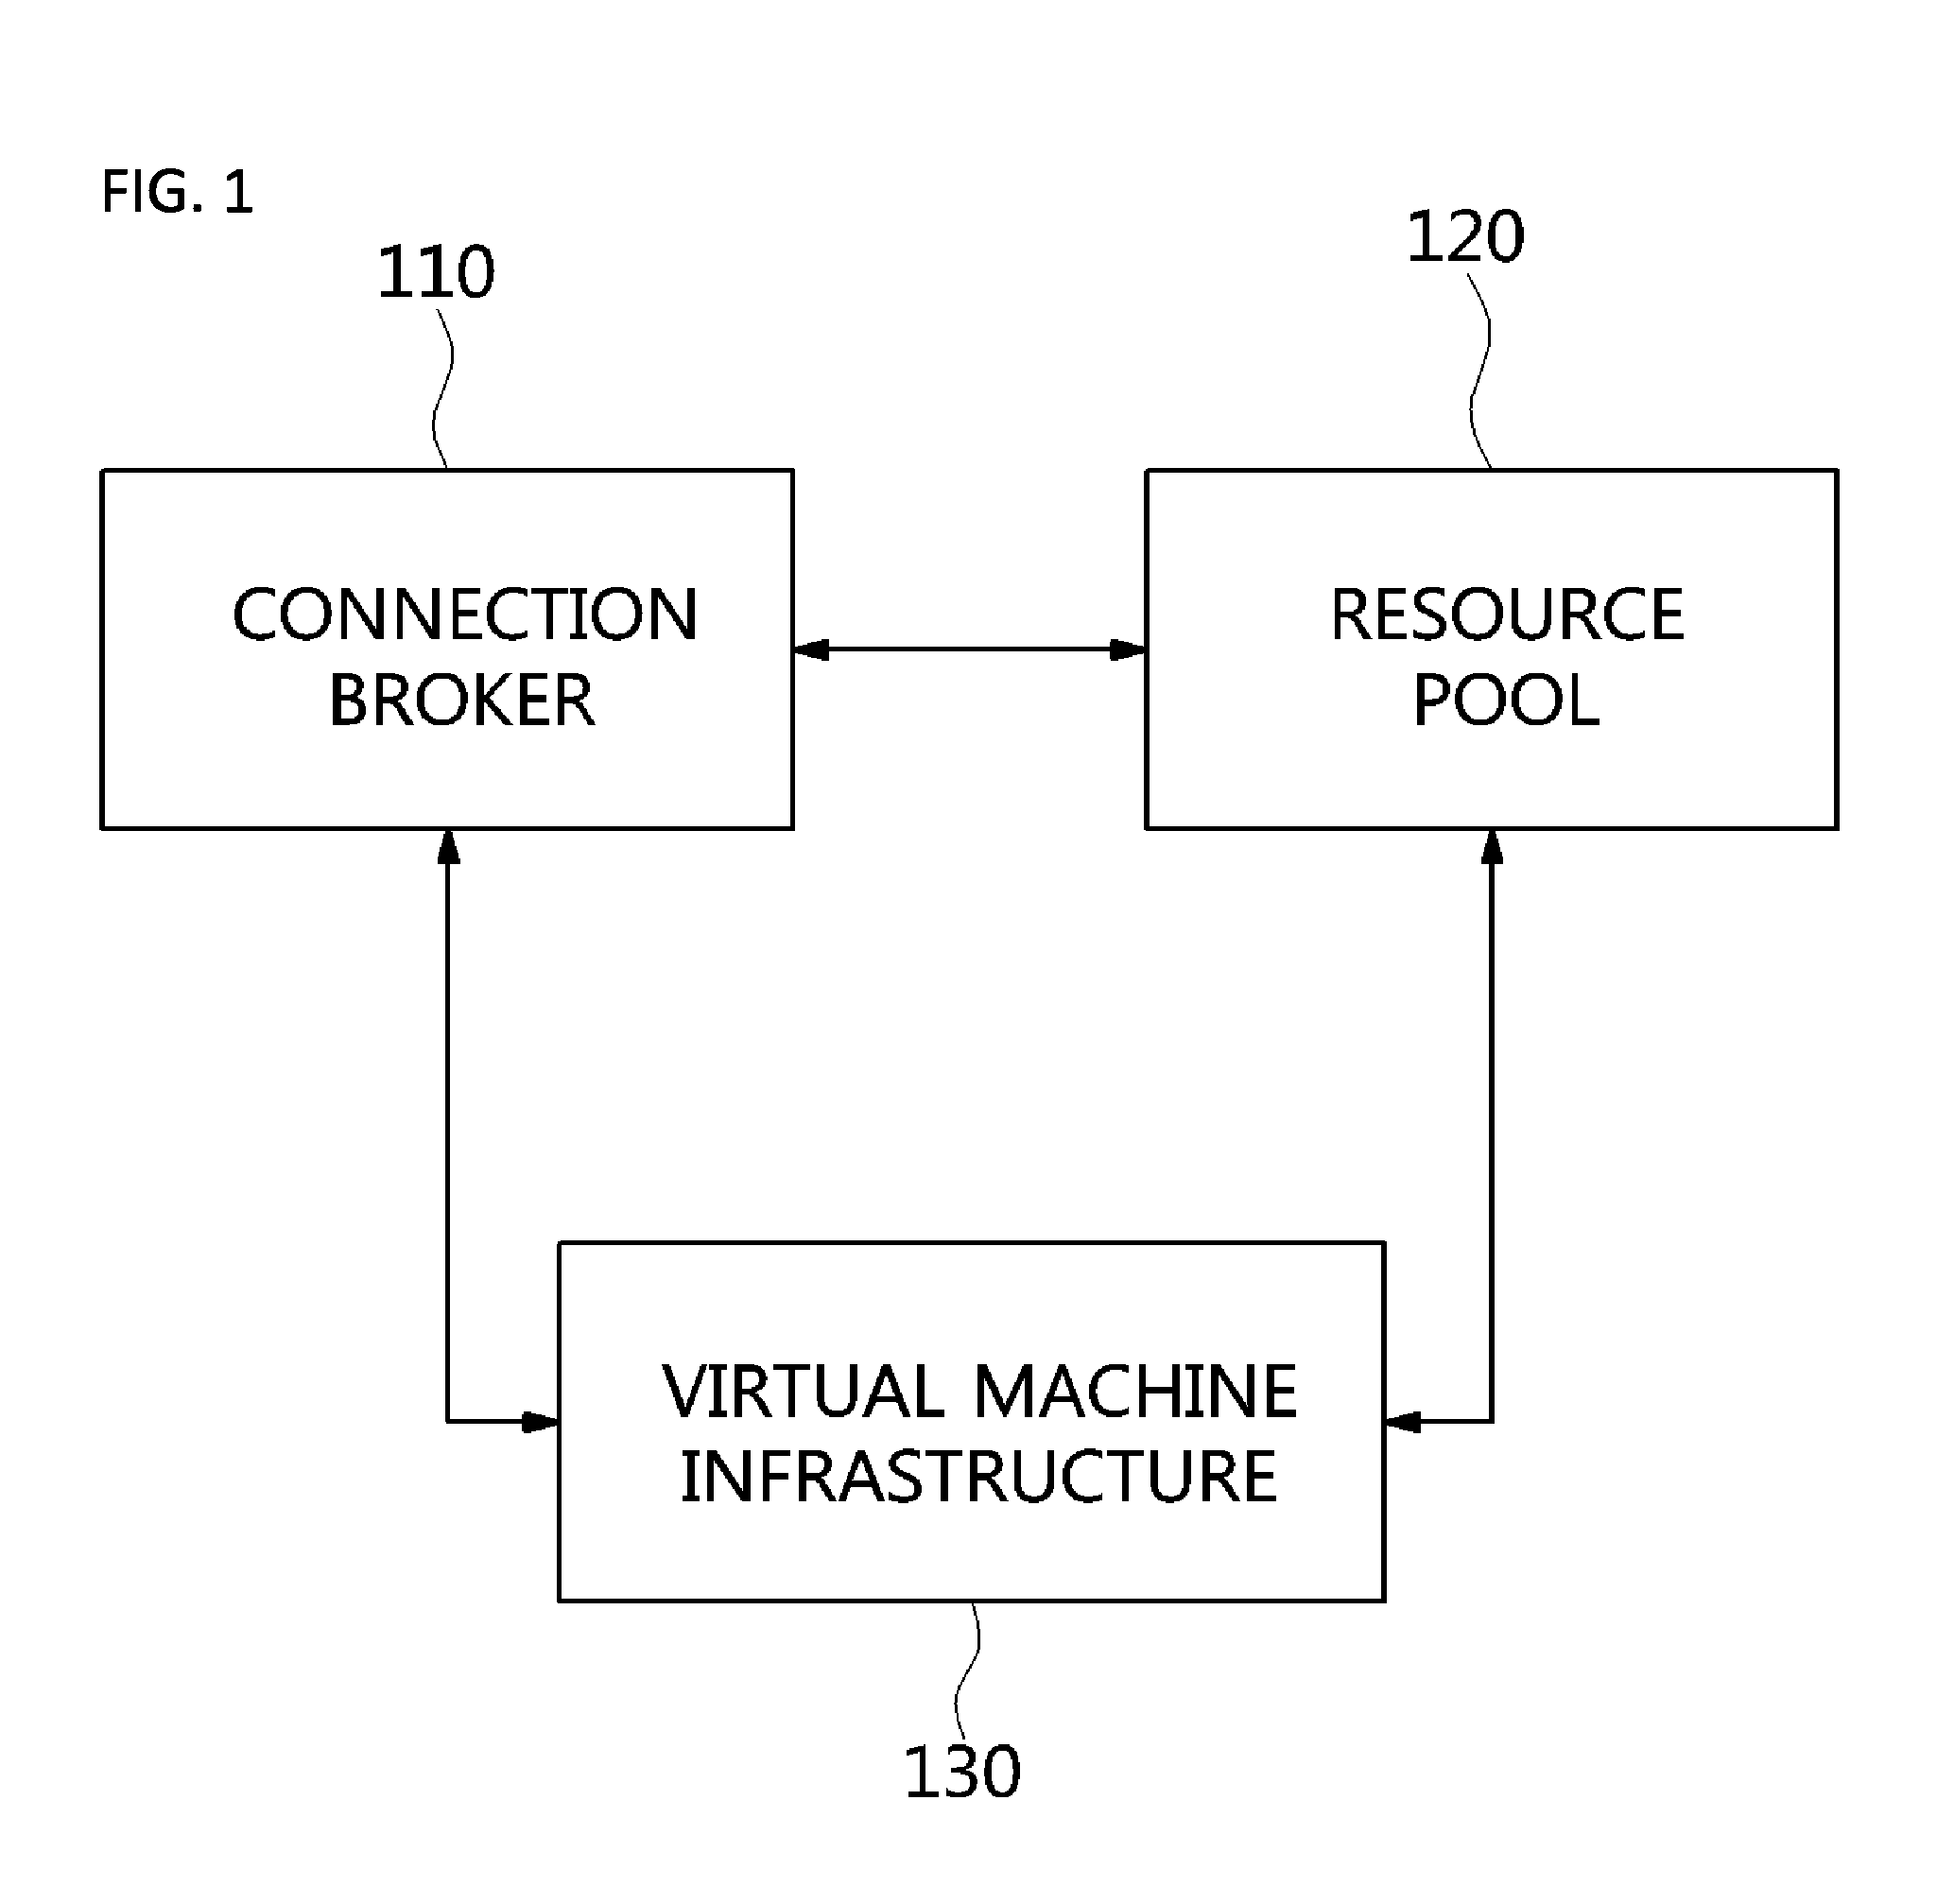 Apparatus and method for in-memory-based virtual desktop service